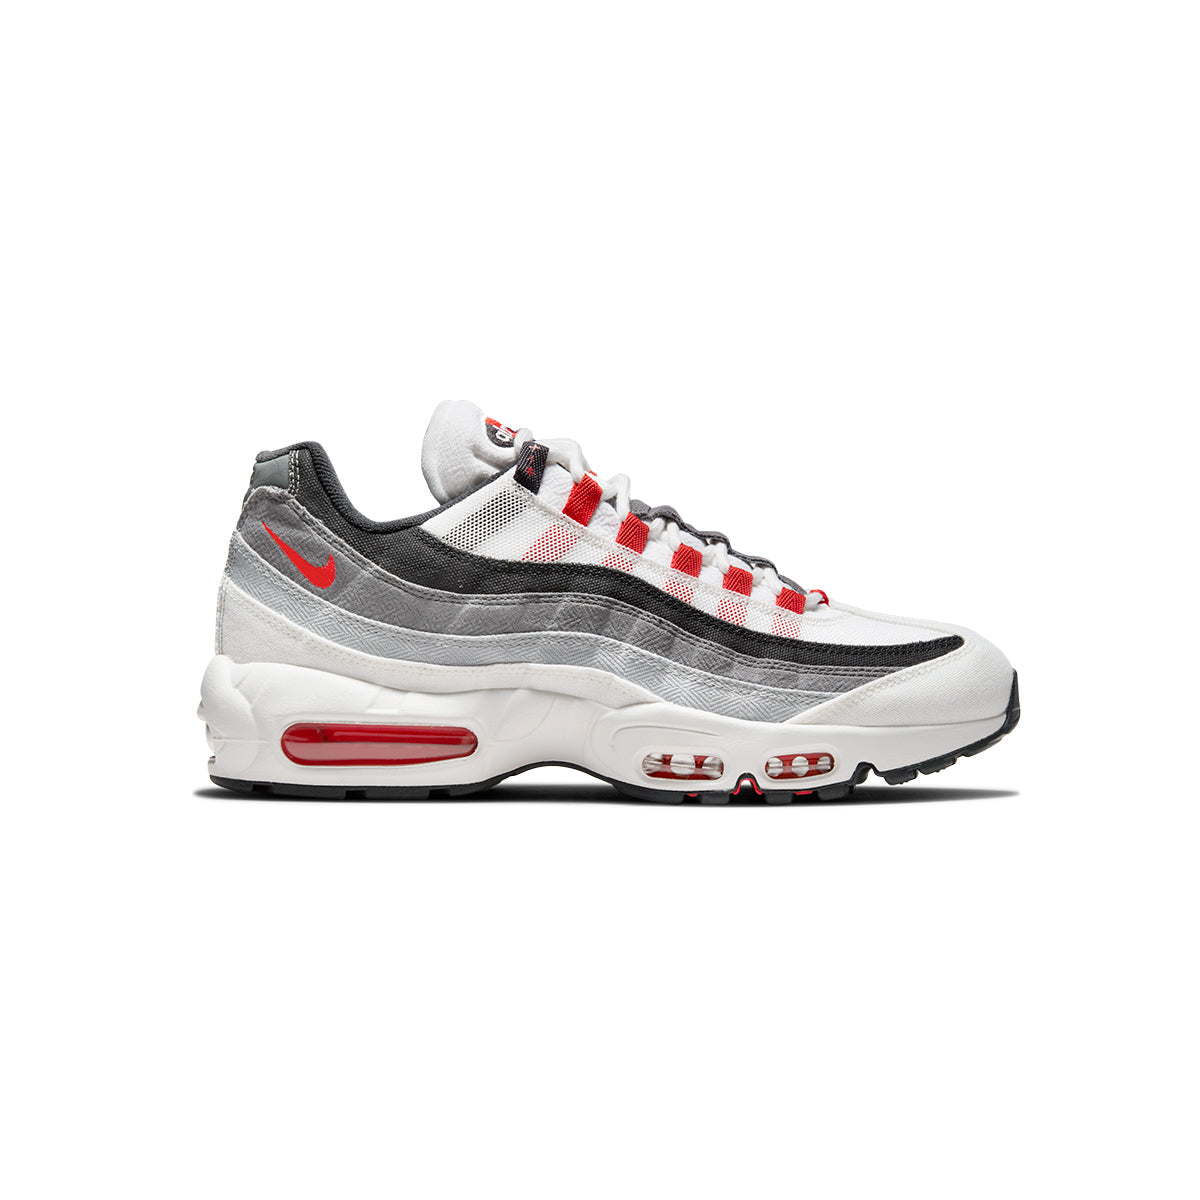 zijde Broer Beugel Nike Air Max 95 Shoes (Summit White/Chile Red/Off Noir) – Concepts